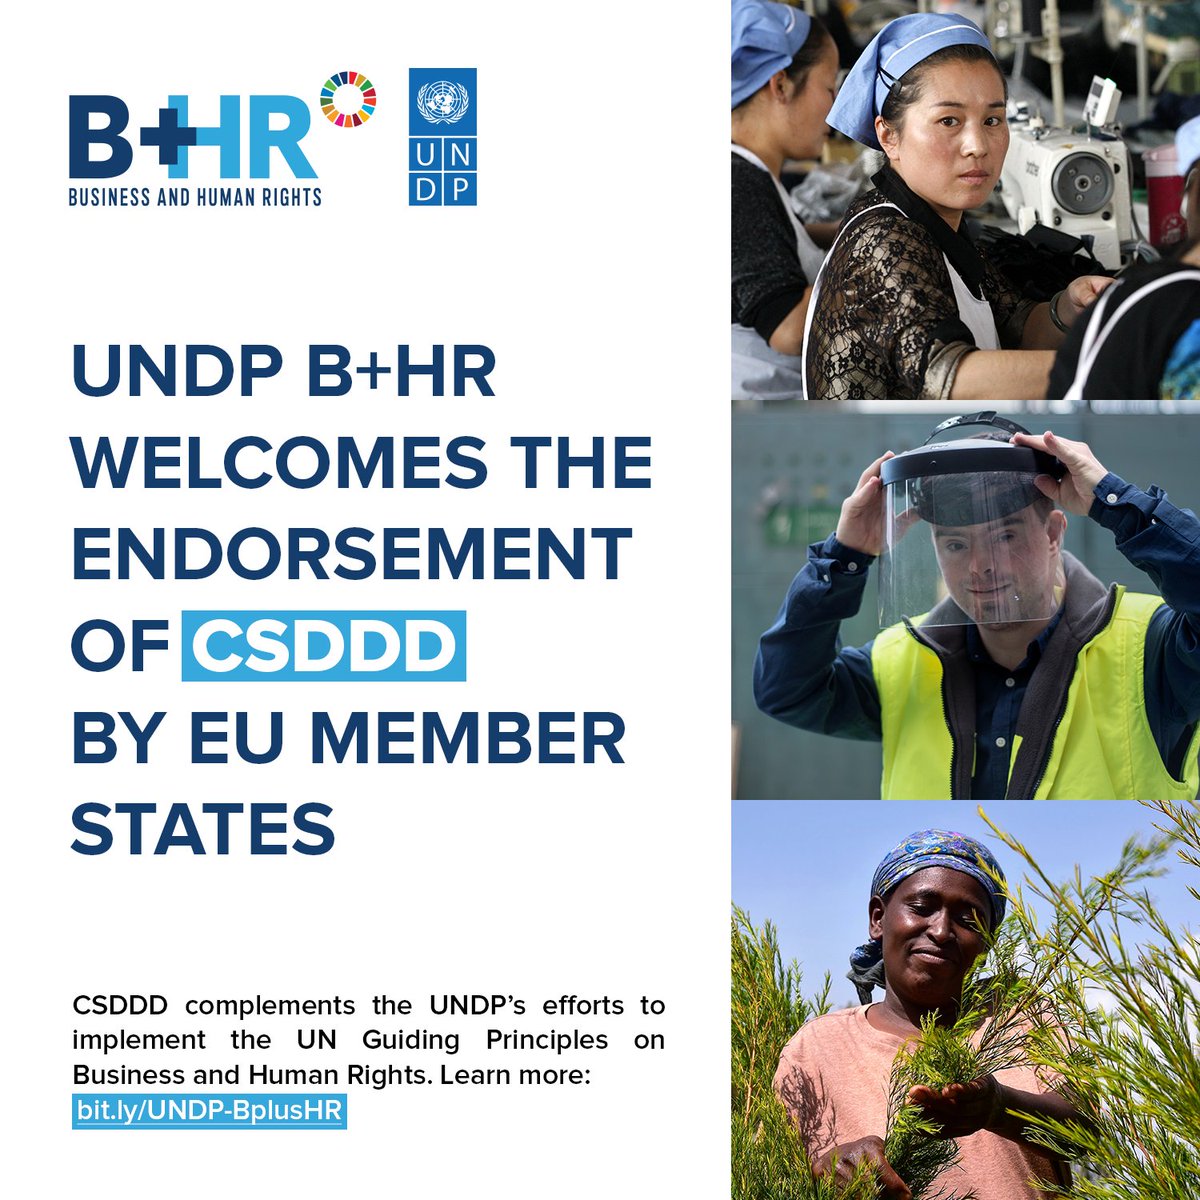 UNDP B+HR welcomes the endorsement of #CSDDD by  🇪🇺 Member States.

CSDDD complements UNDP’s efforts to support govts, #biz, civil society, National #HumanRights Institutions, human rights defenders, media & others in implementing the #UNGPs in 3️⃣9️⃣ countries across 5️⃣ regions.